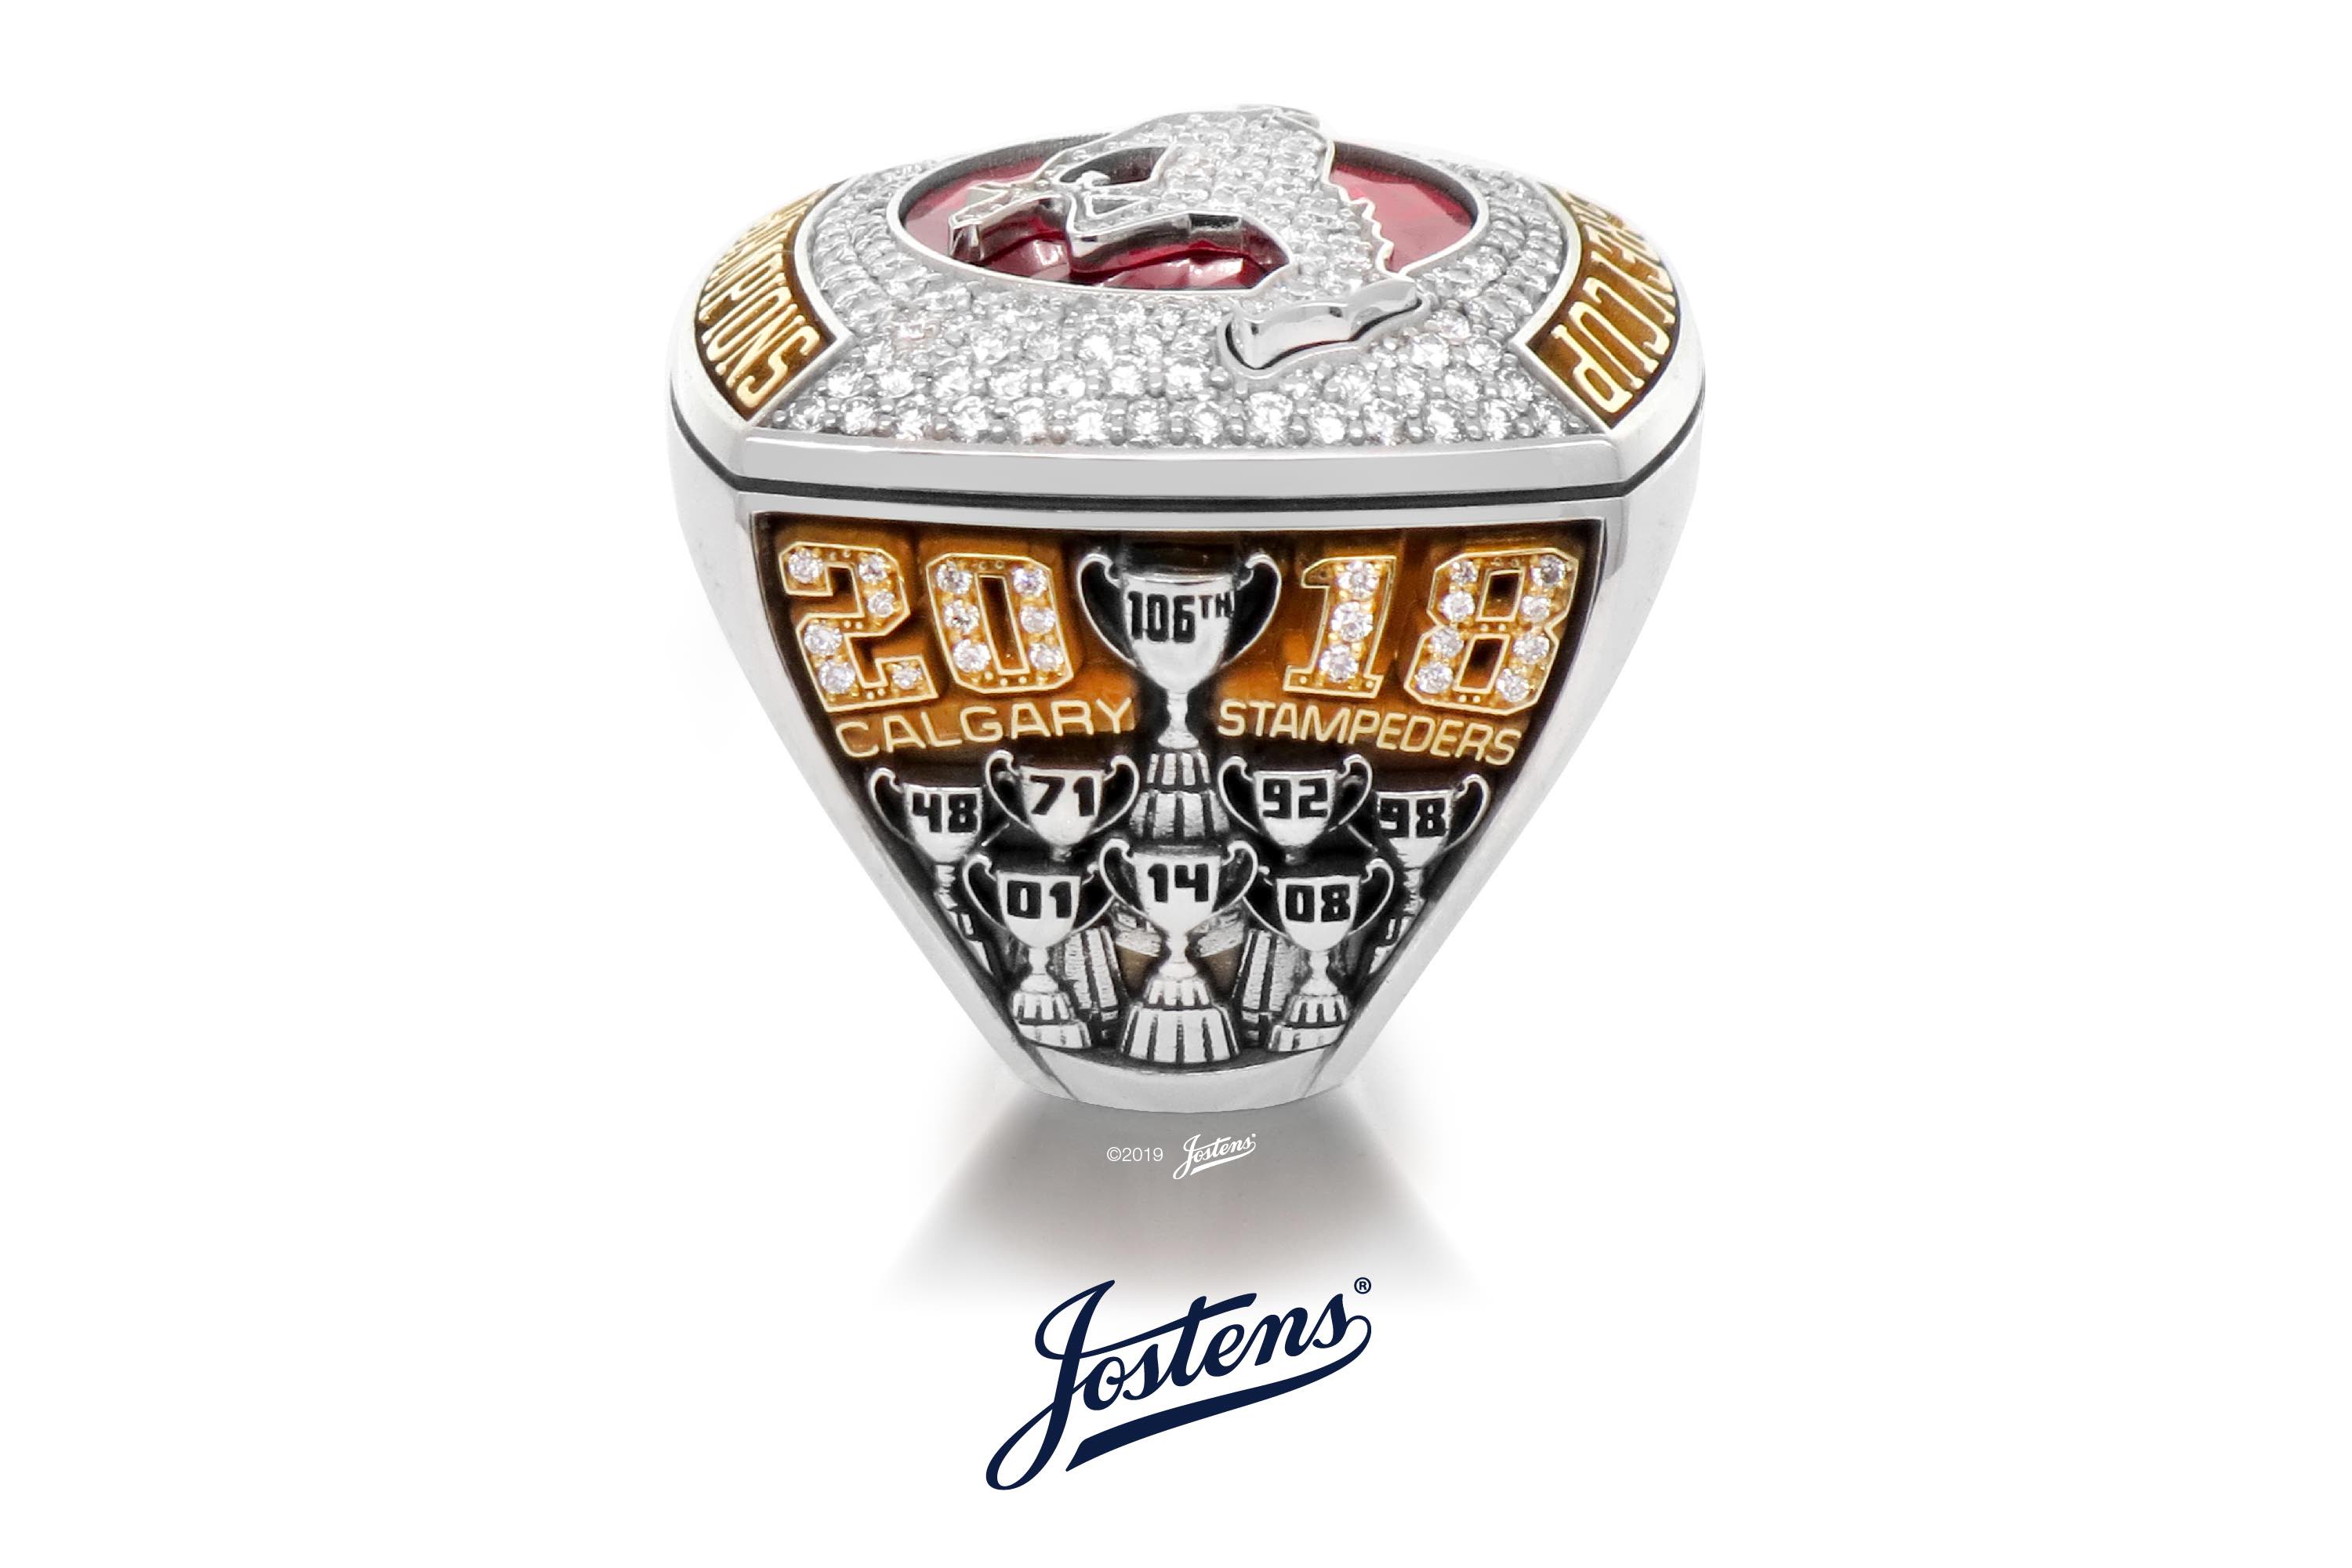 Side detail of Calgary Stampeders 2018 Grey Cup Championship Ring, created by Jostens. 